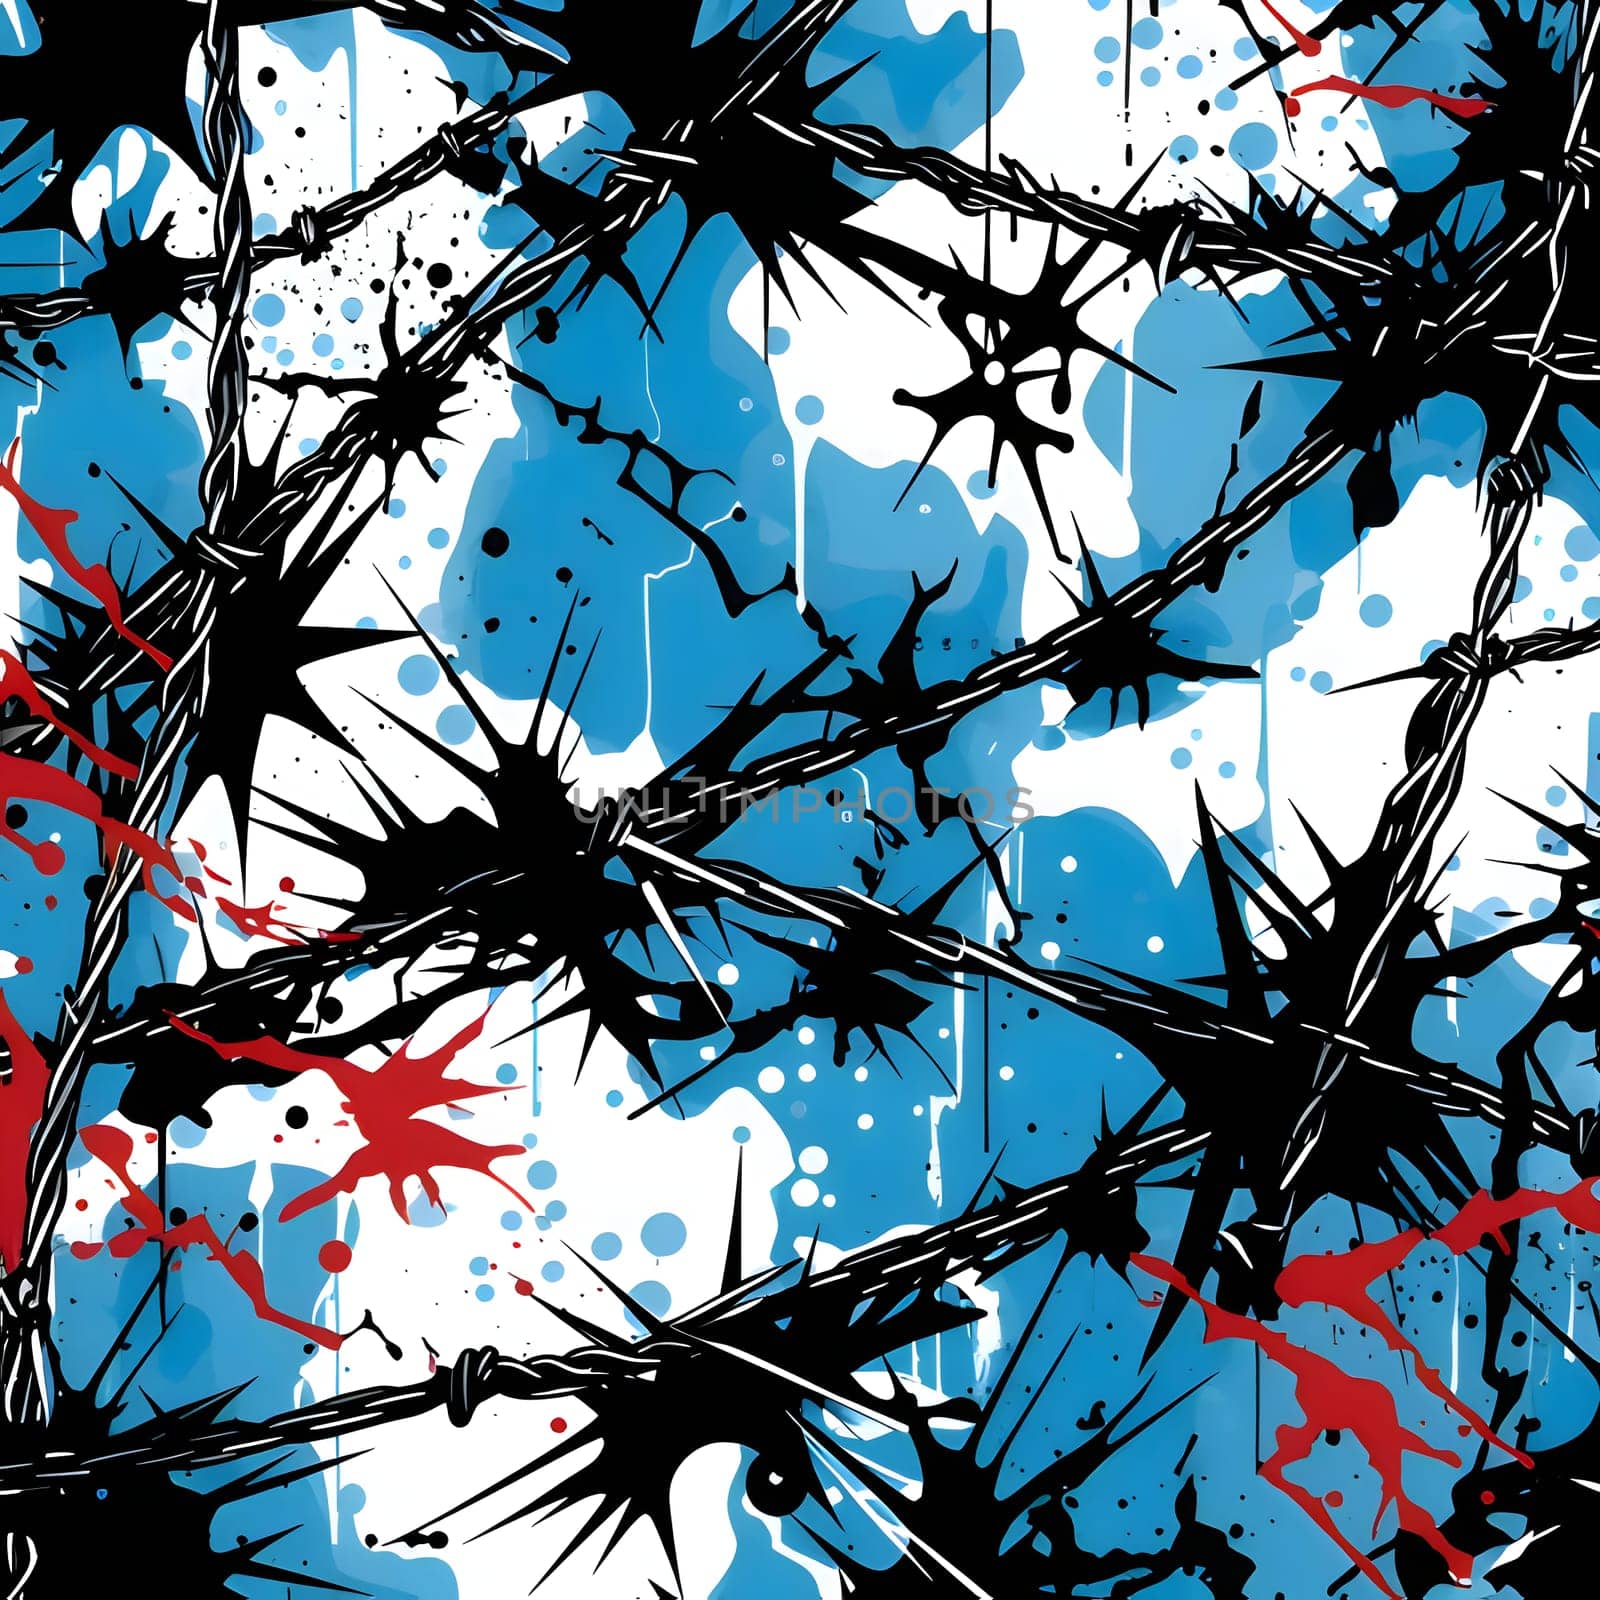 Patterns and banners backgrounds: Seamless pattern with hand drawn brush strokes and splashes. Grunge background.